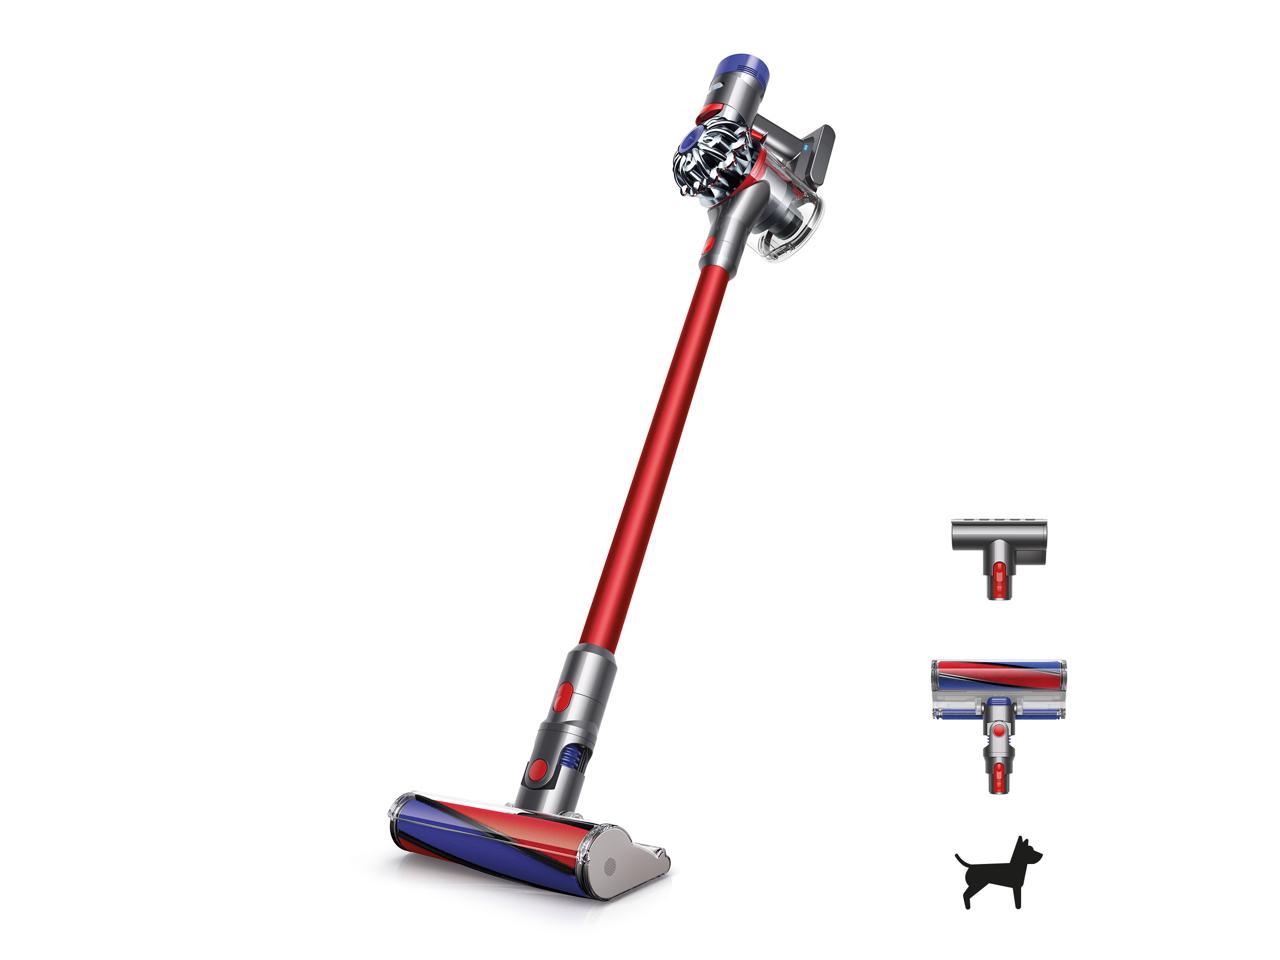 Dyson V8 Fluffy Cordless Vacuum (Red, New Condition) $299